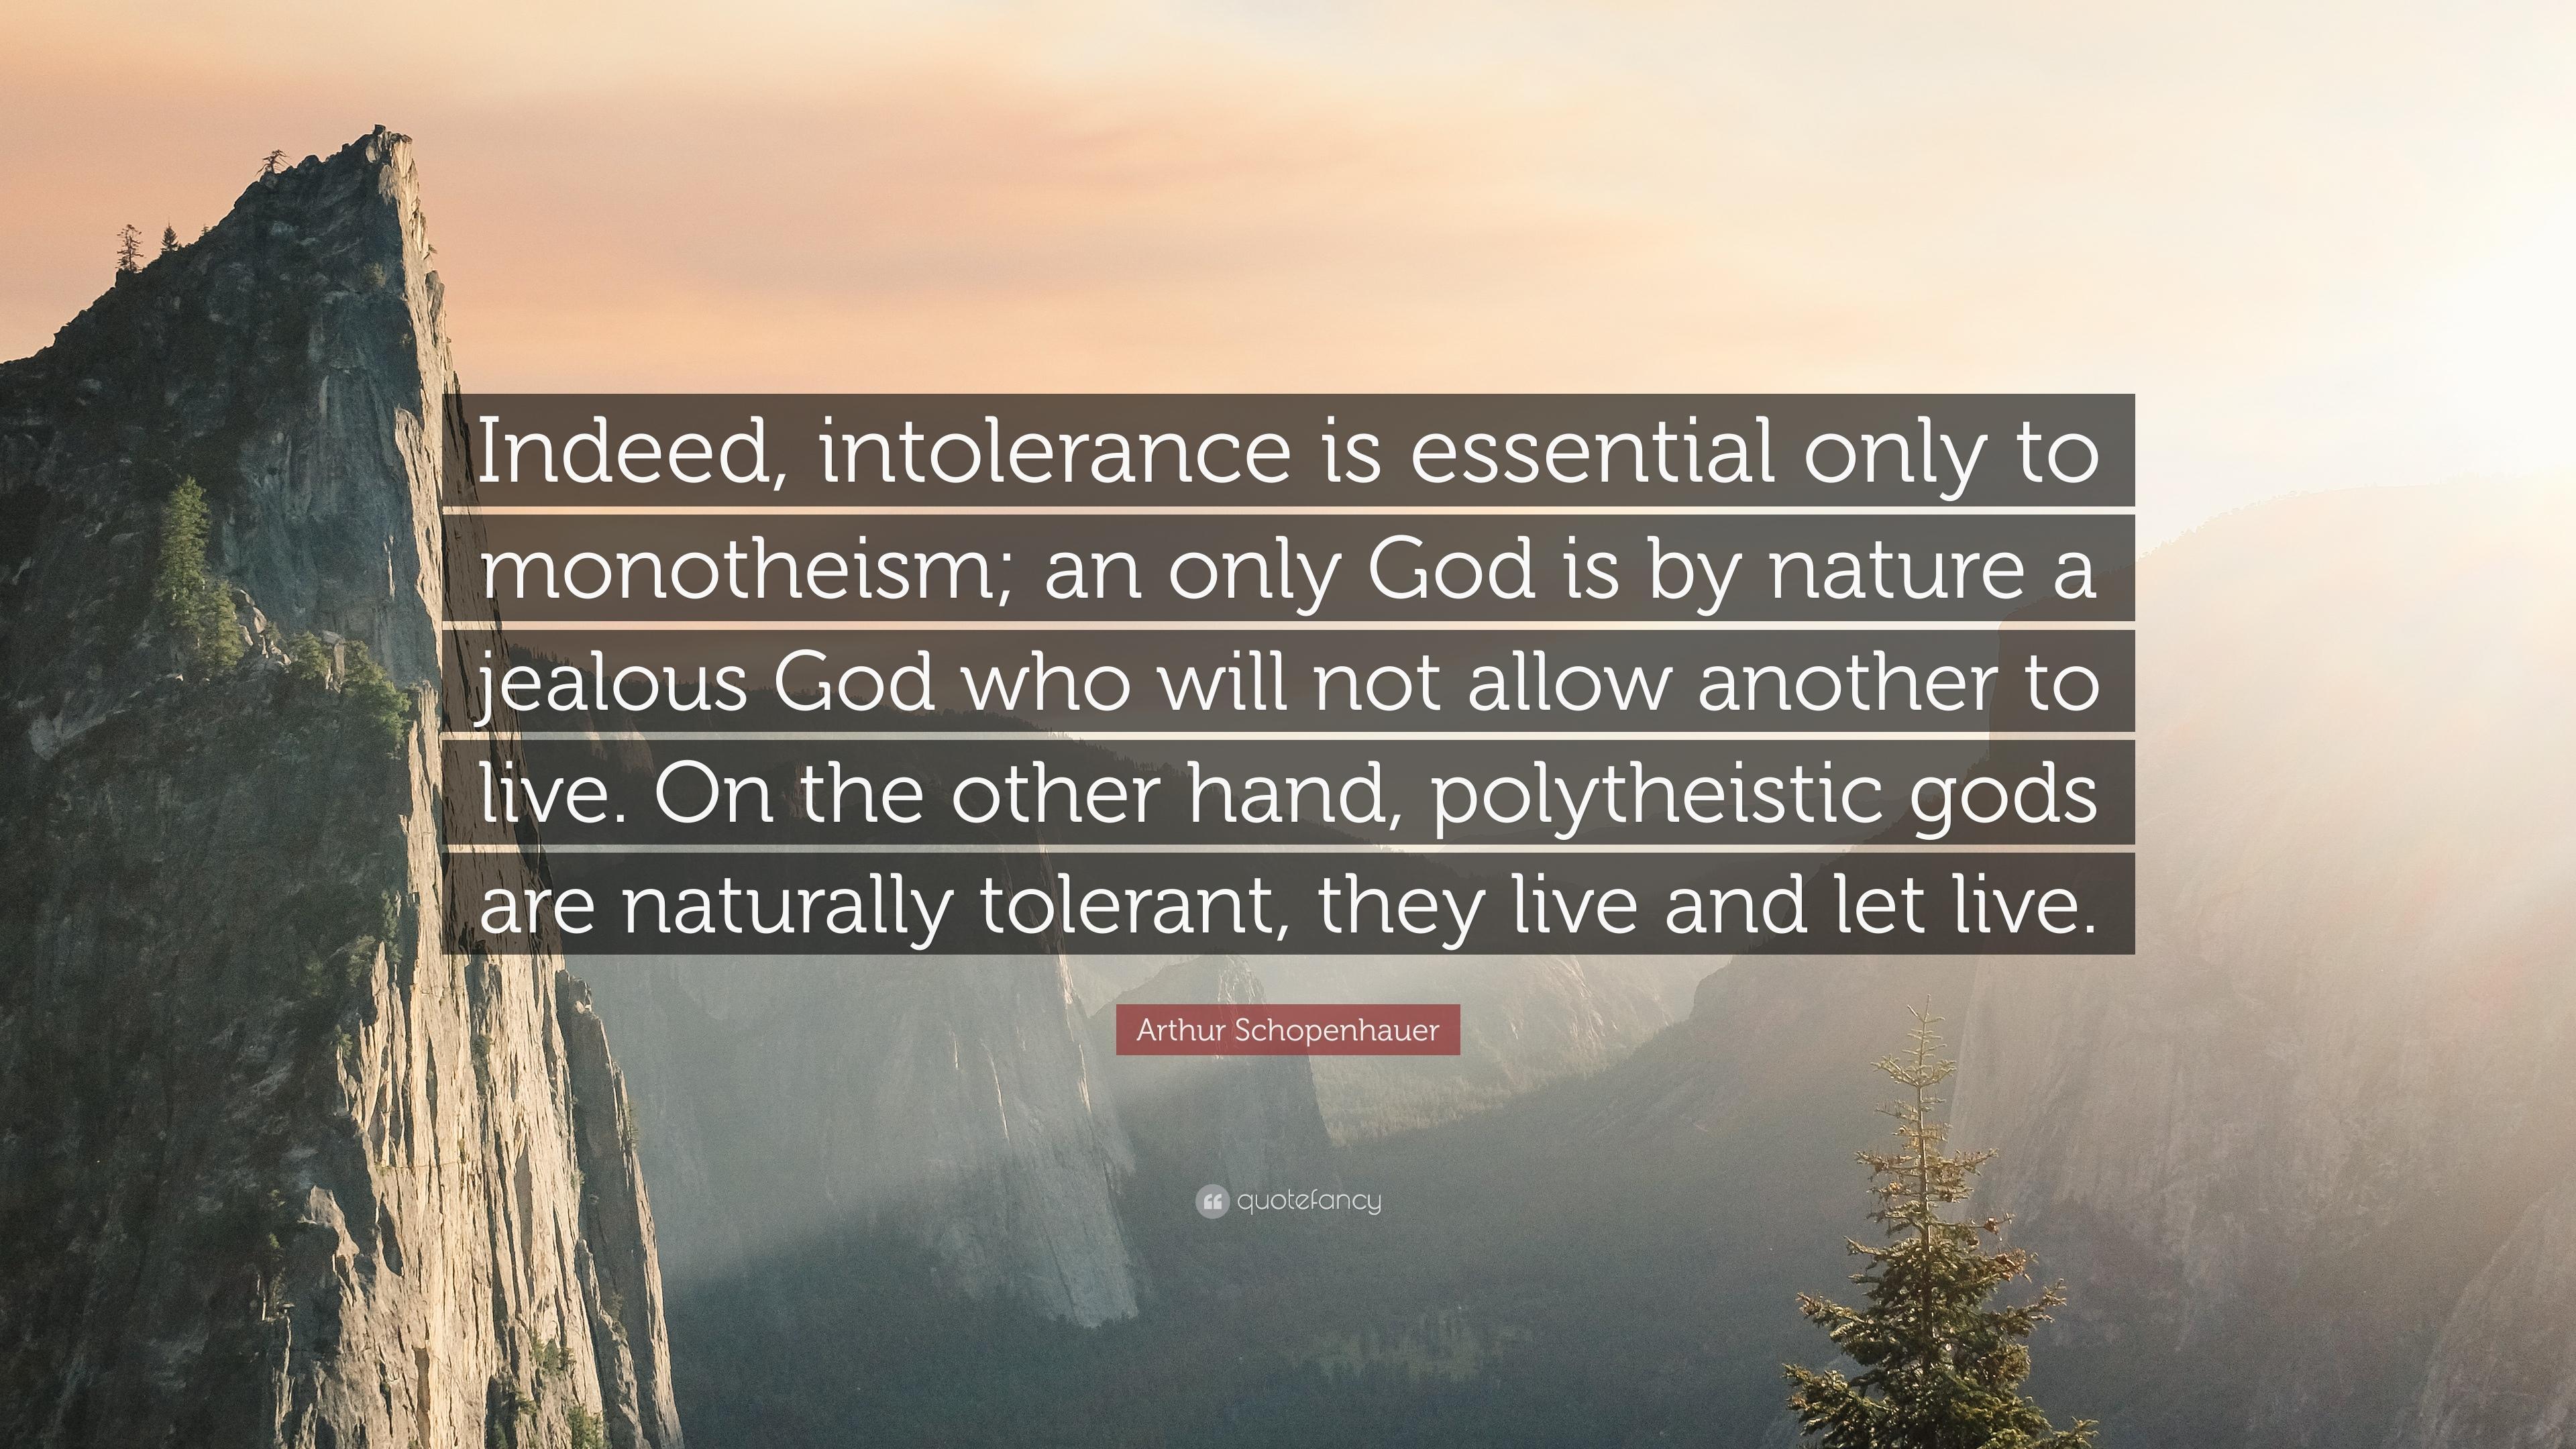 Arthur Schopenhauer Quote: “Indeed, intolerance is essential only to